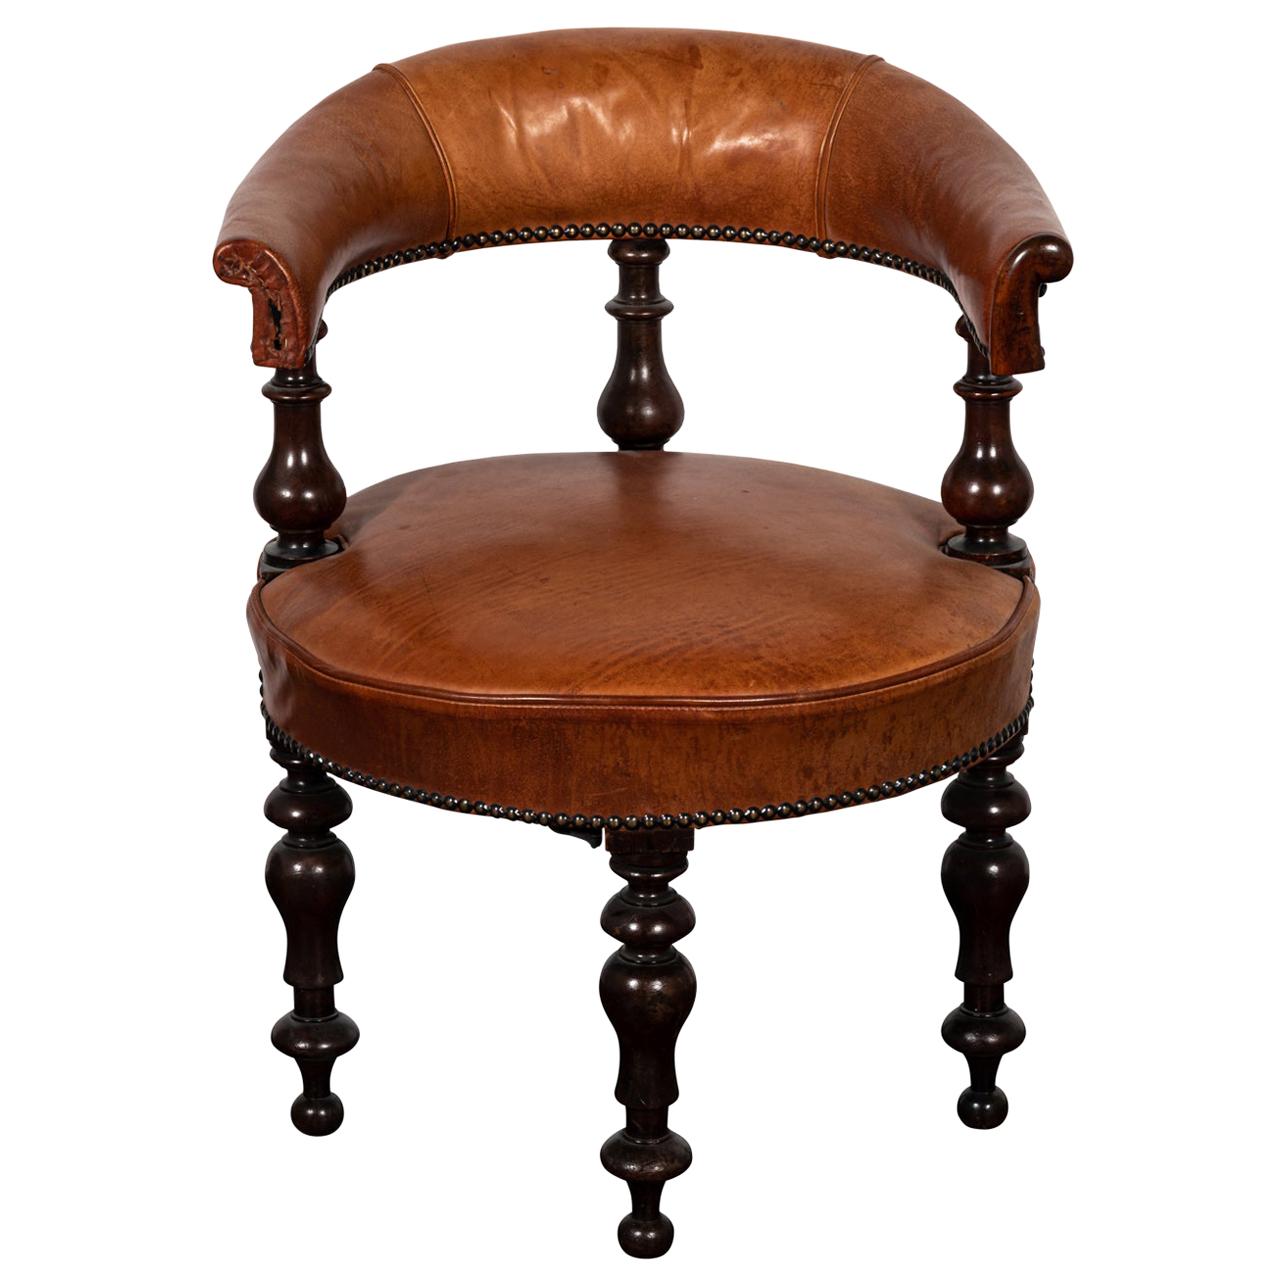 19th Century English Leather Upholstered Desk Chair